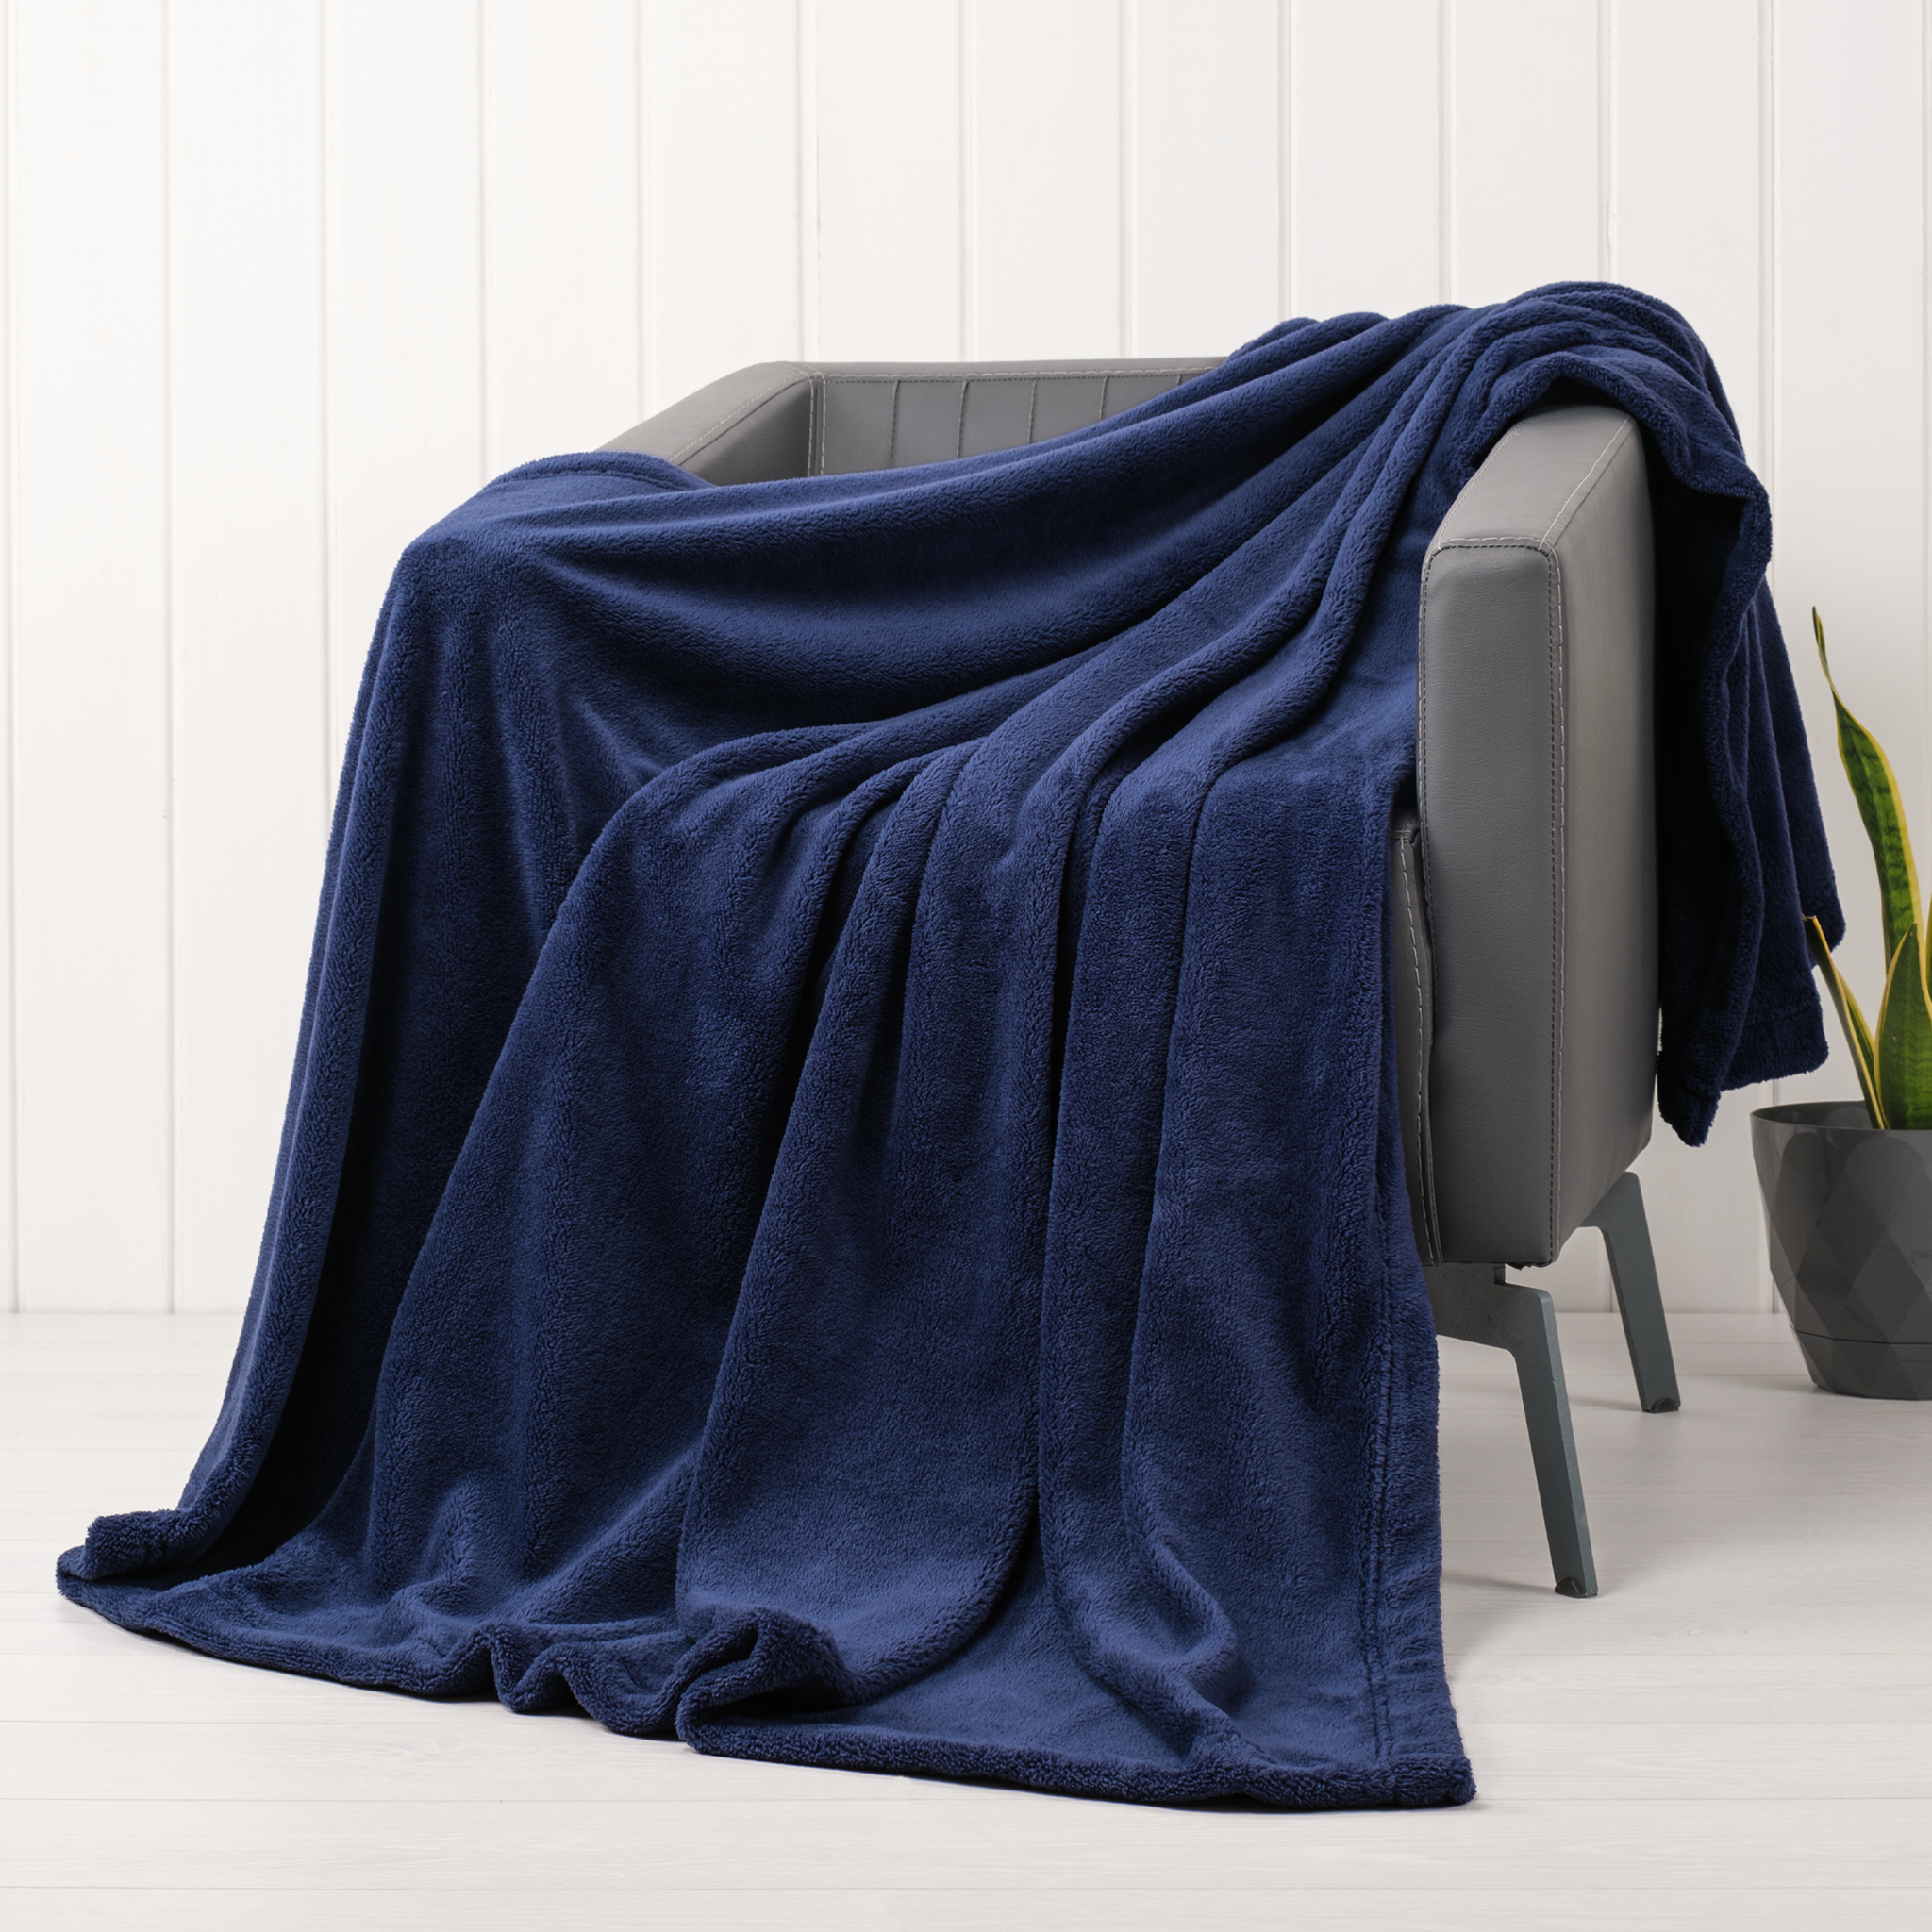 American Soft Linen - Bedding Fleece Blanket - Wholesale - 15 Set Case Pack - Twin Size 60x80 inches - Navy-Blue - 1